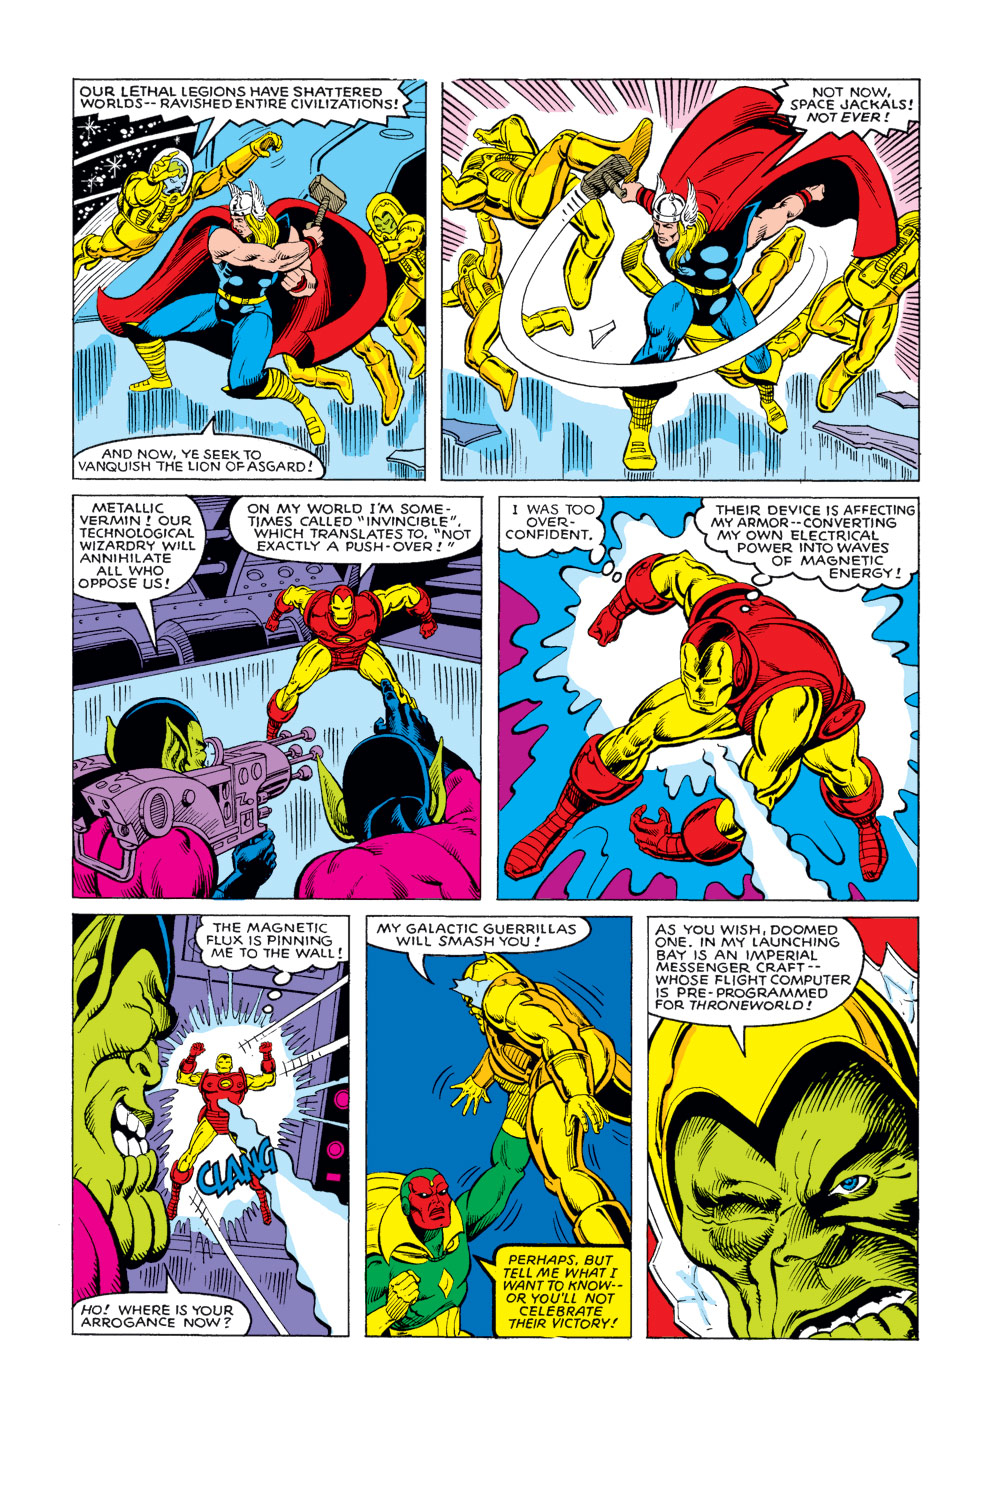 What If? (1977) issue 20 - The Avengers fought the Kree-Skrull war without Rick Jones - Page 10